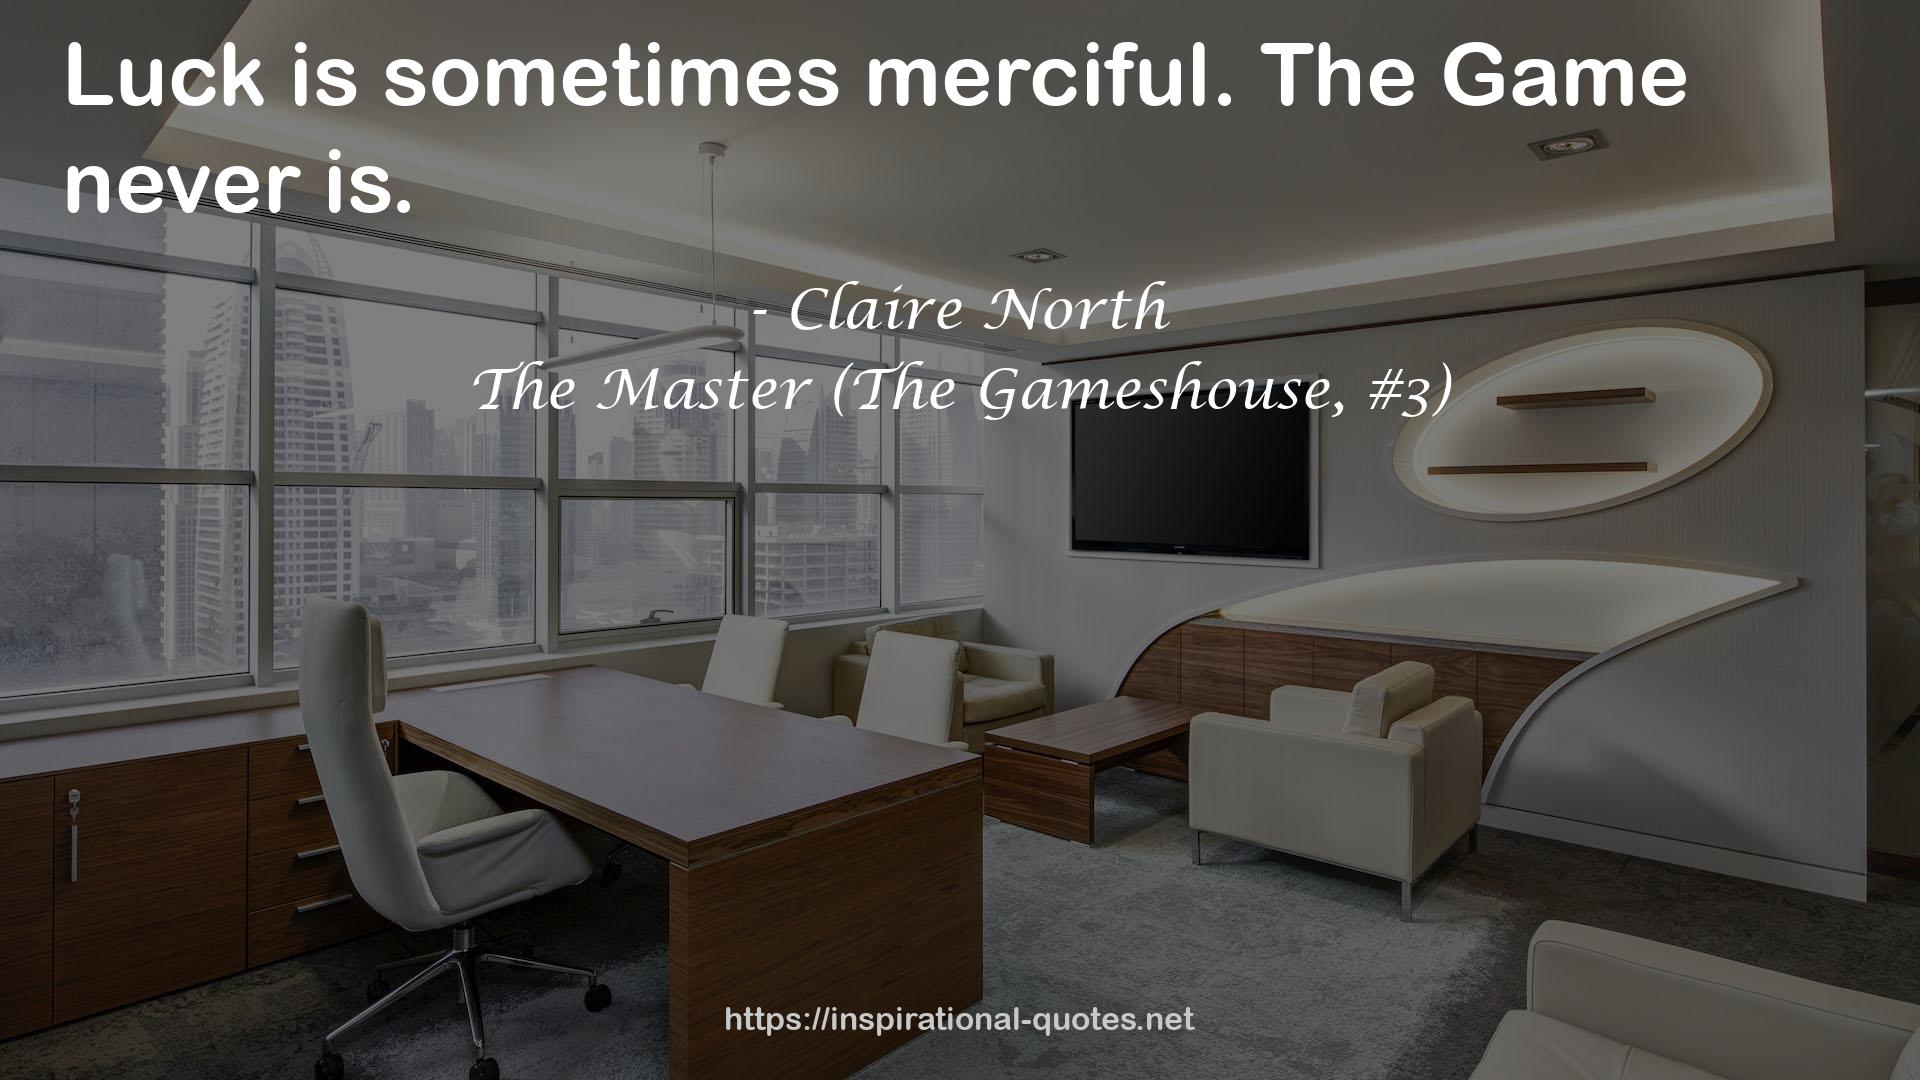 The Master (The Gameshouse, #3) QUOTES